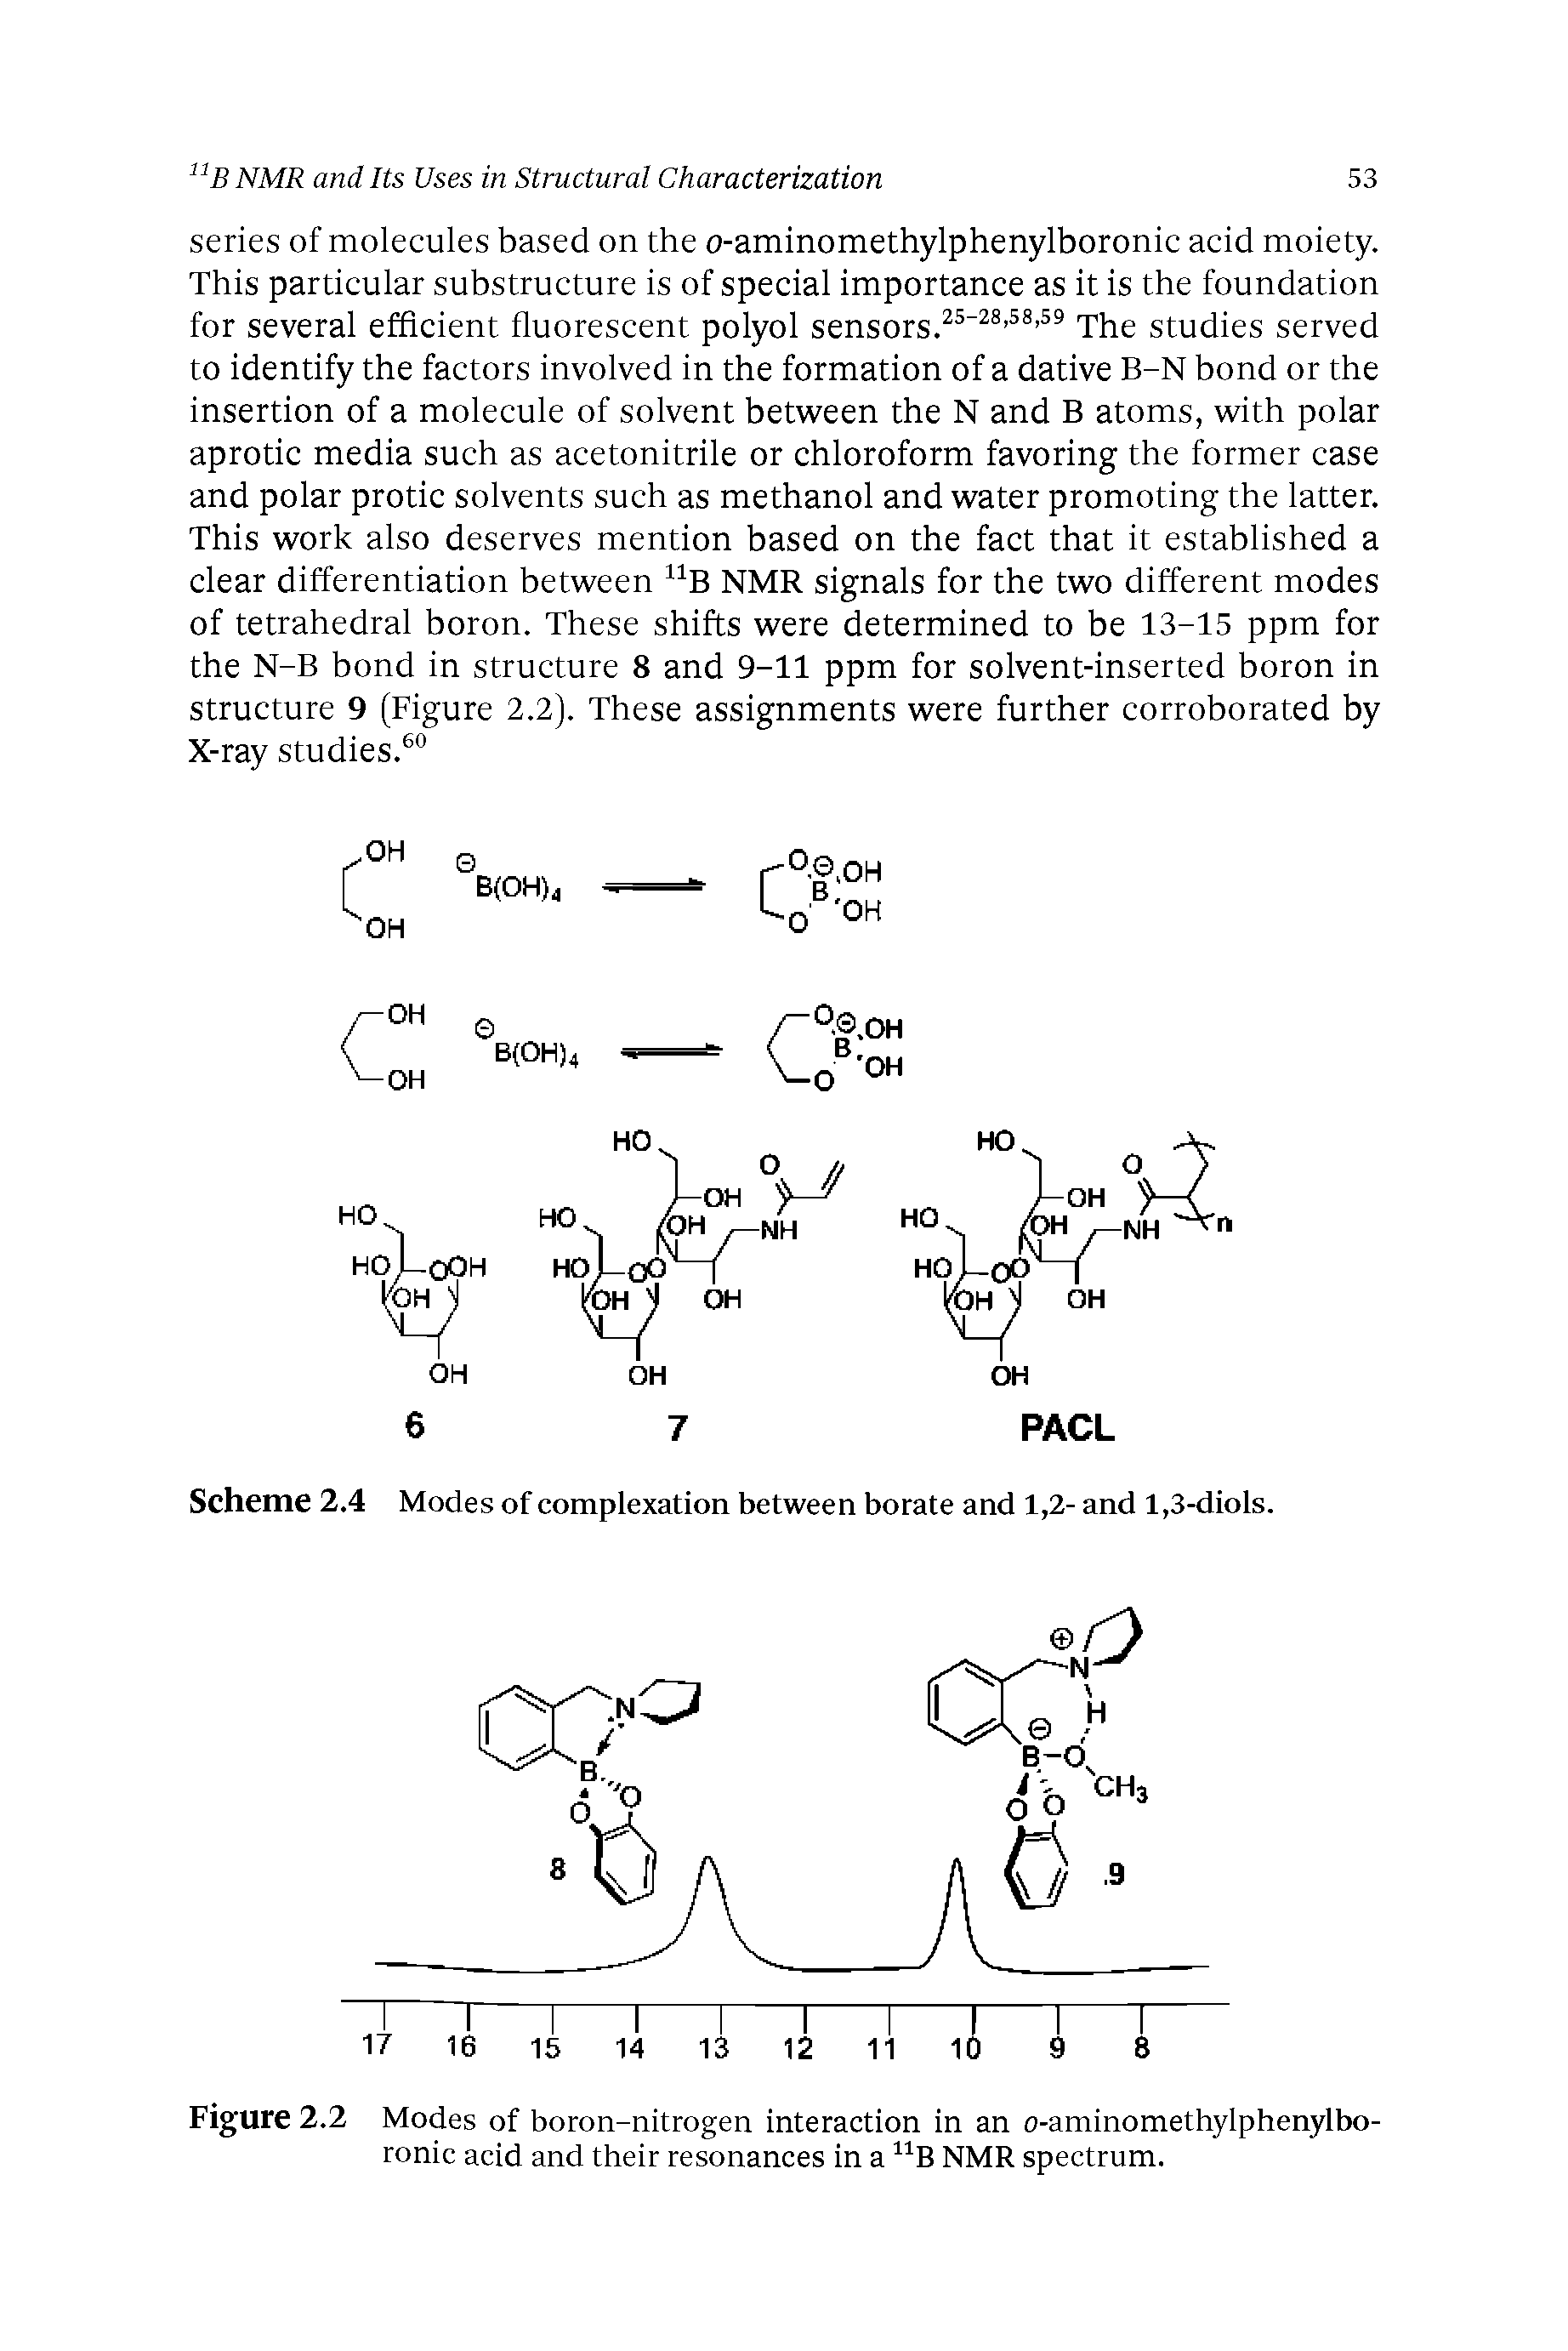 Figure 2.2 Modes of boron-nitrogen interaction in an o-aminomethylphenylboronic acid and their resonances in a NMR spectrum.